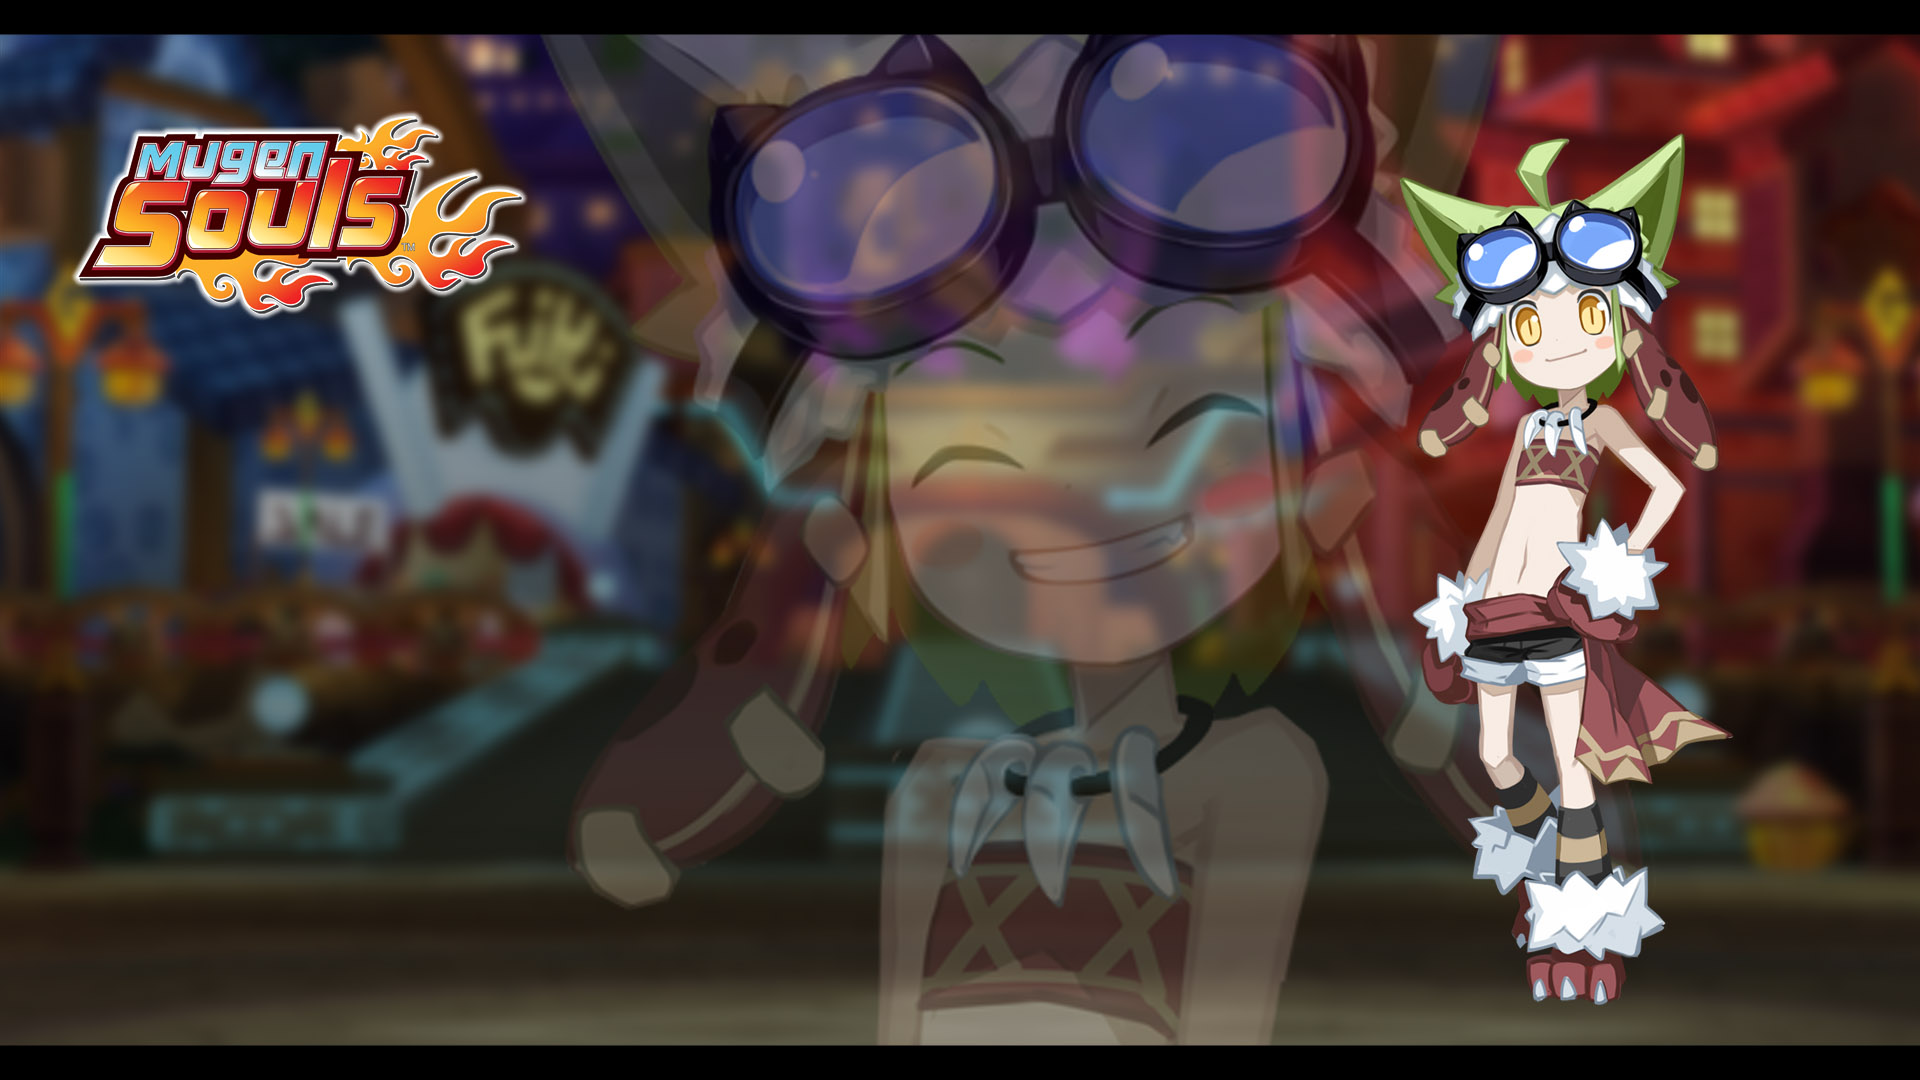 Steam Trading Cards - Mugen Souls | Ethereal Games1920 x 1080